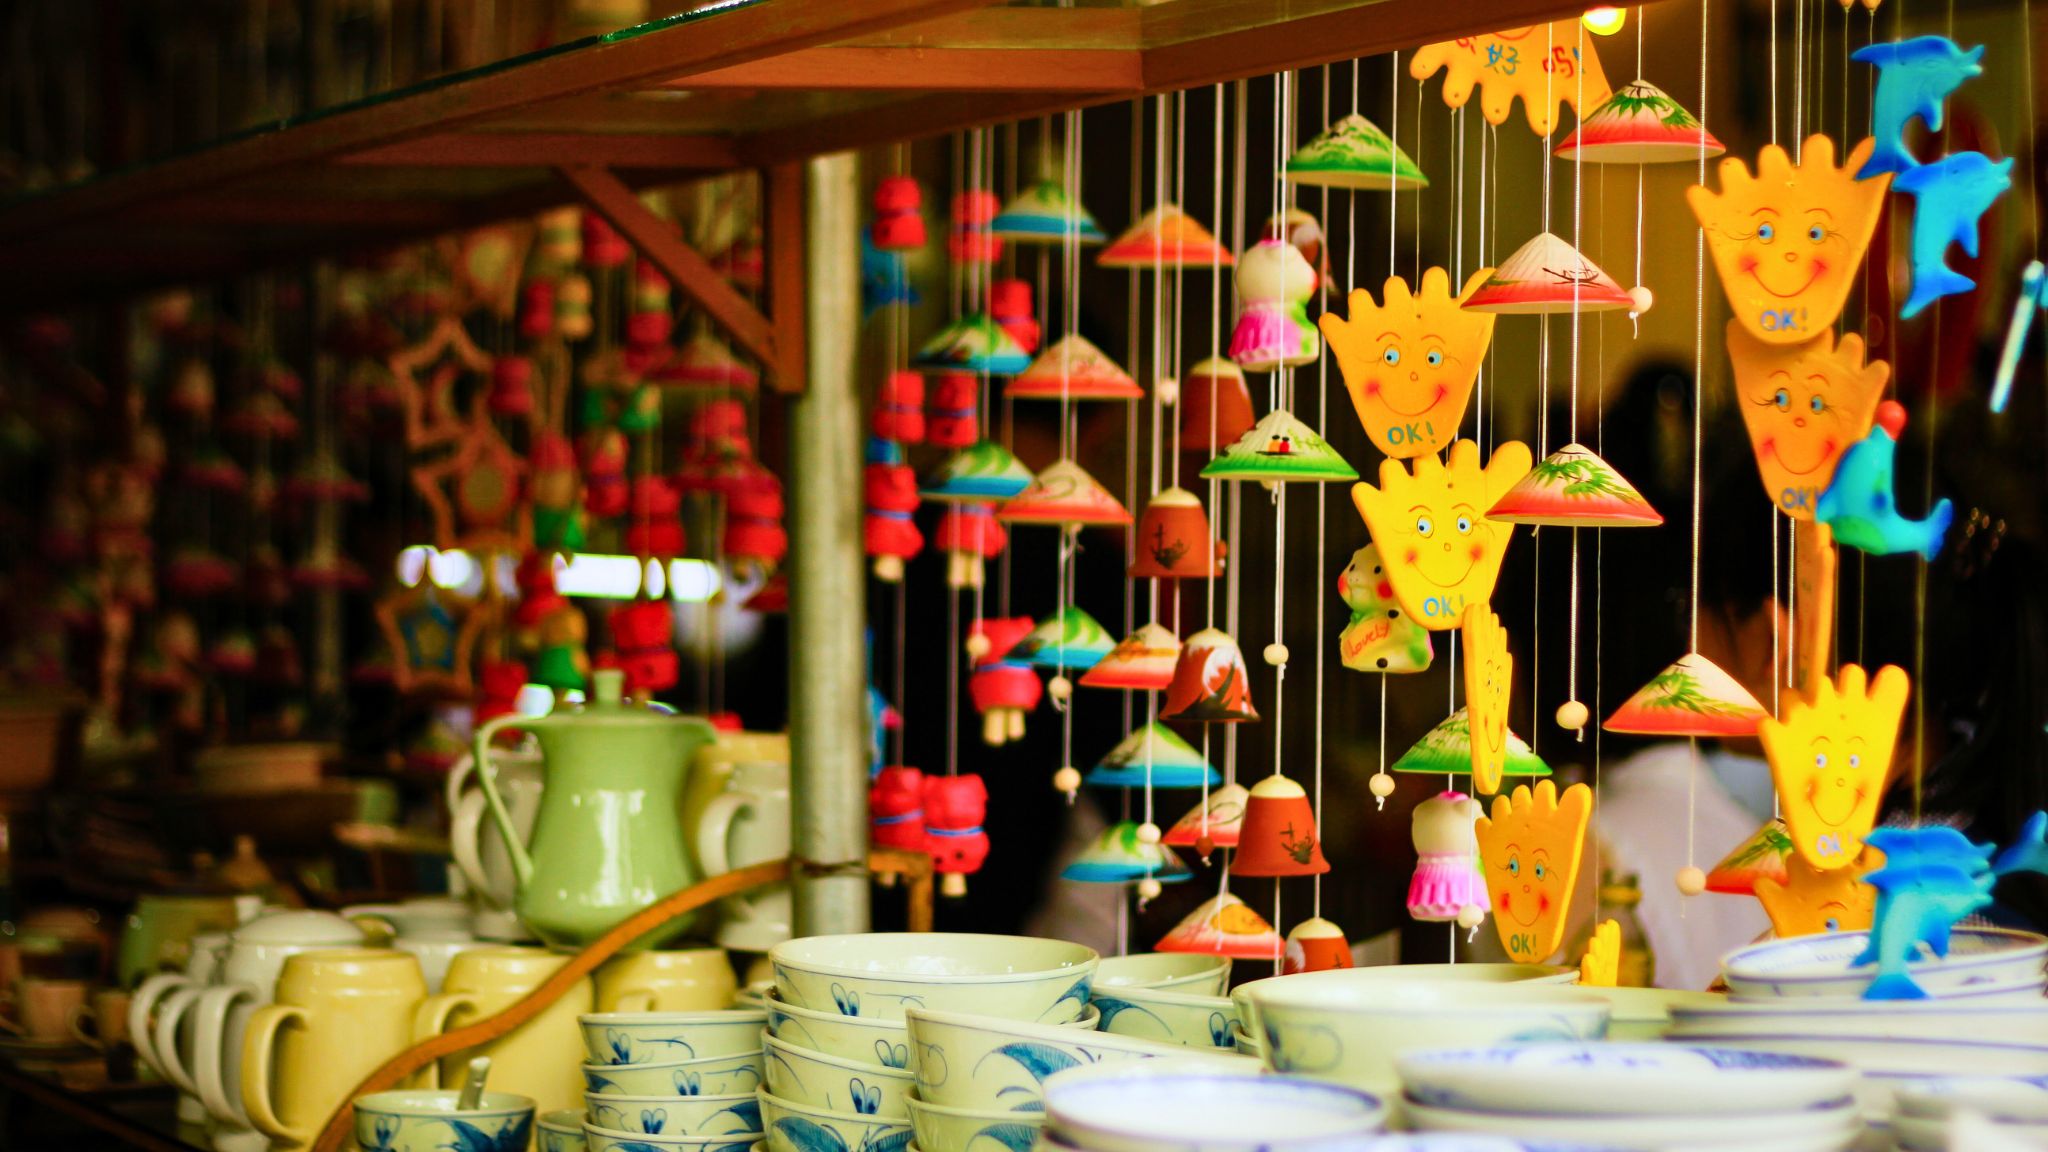 Day 8 Visit Bat Trang Ceramic Village And Make Your Own Products